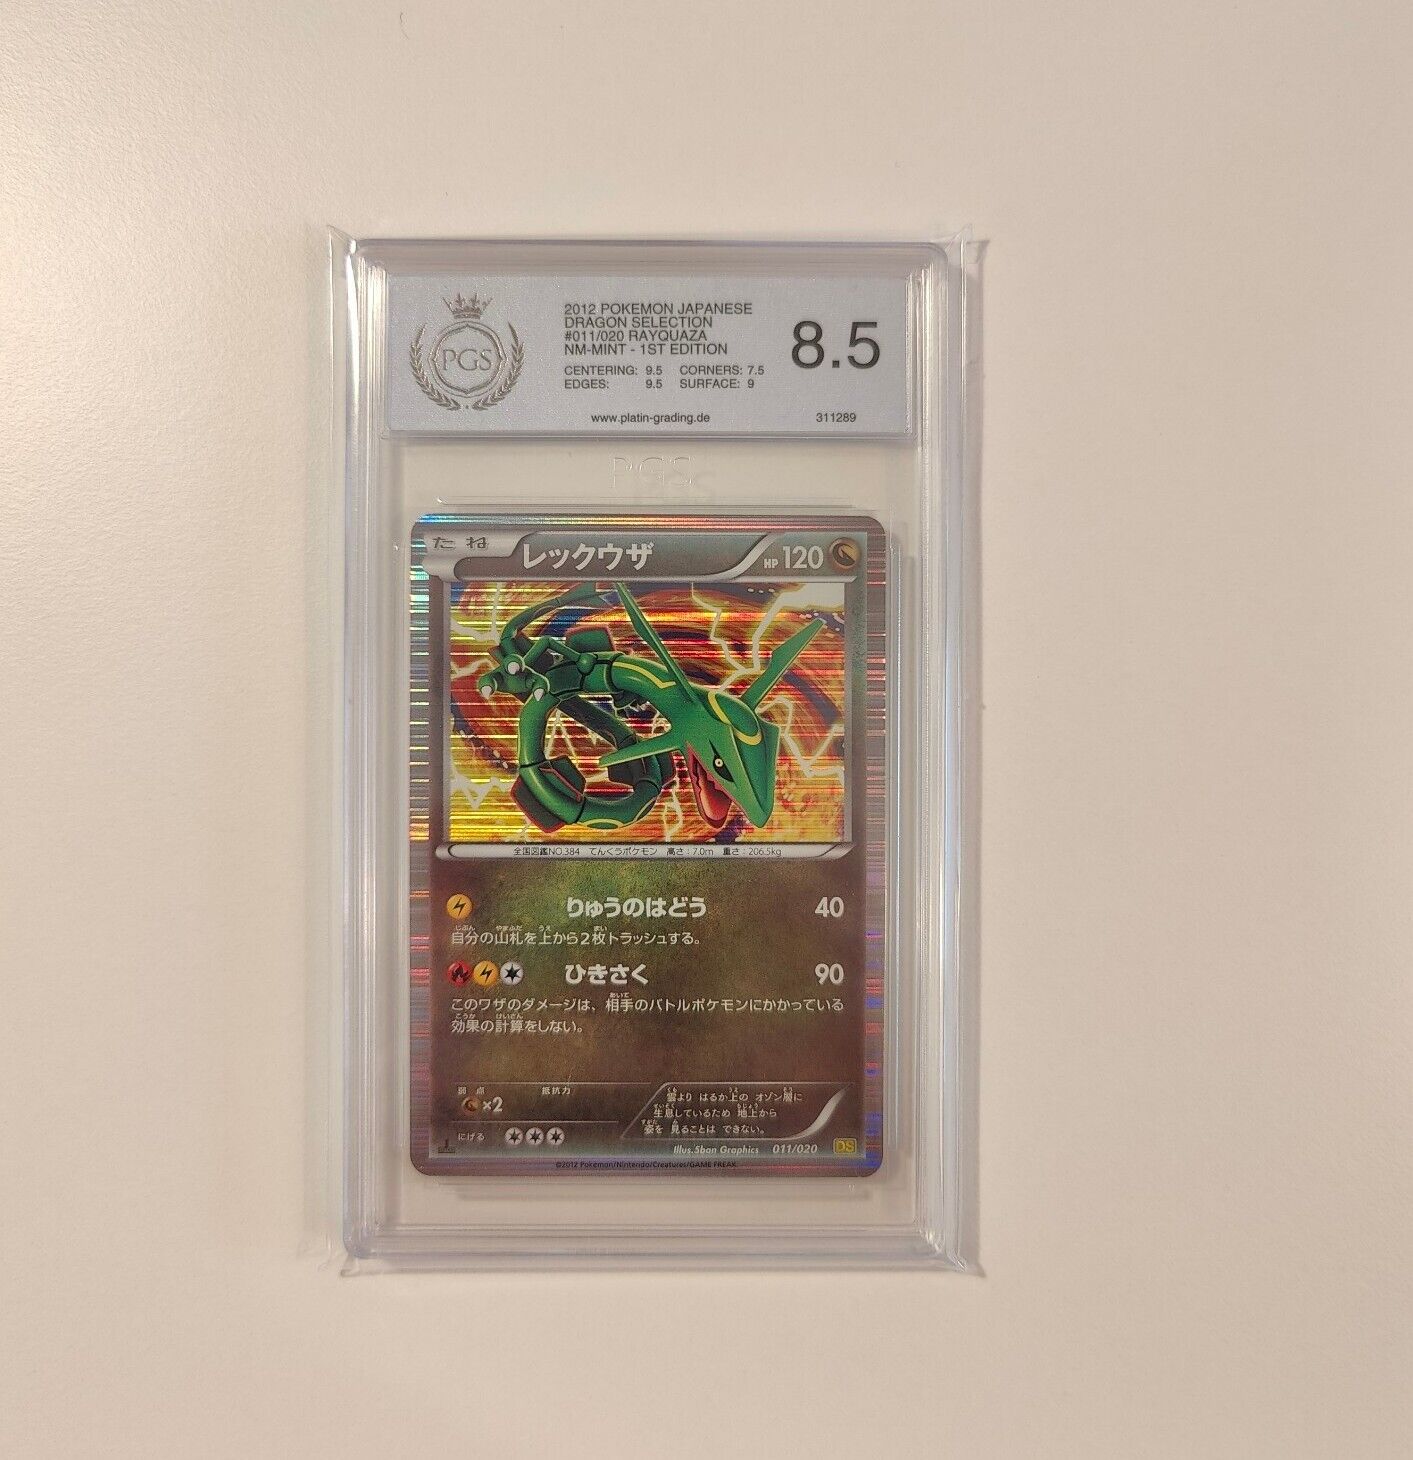 Rayquaza - PGS 8.5 - 1st Edition - 2012 - Dragon Selection - 011/020 - Japanese